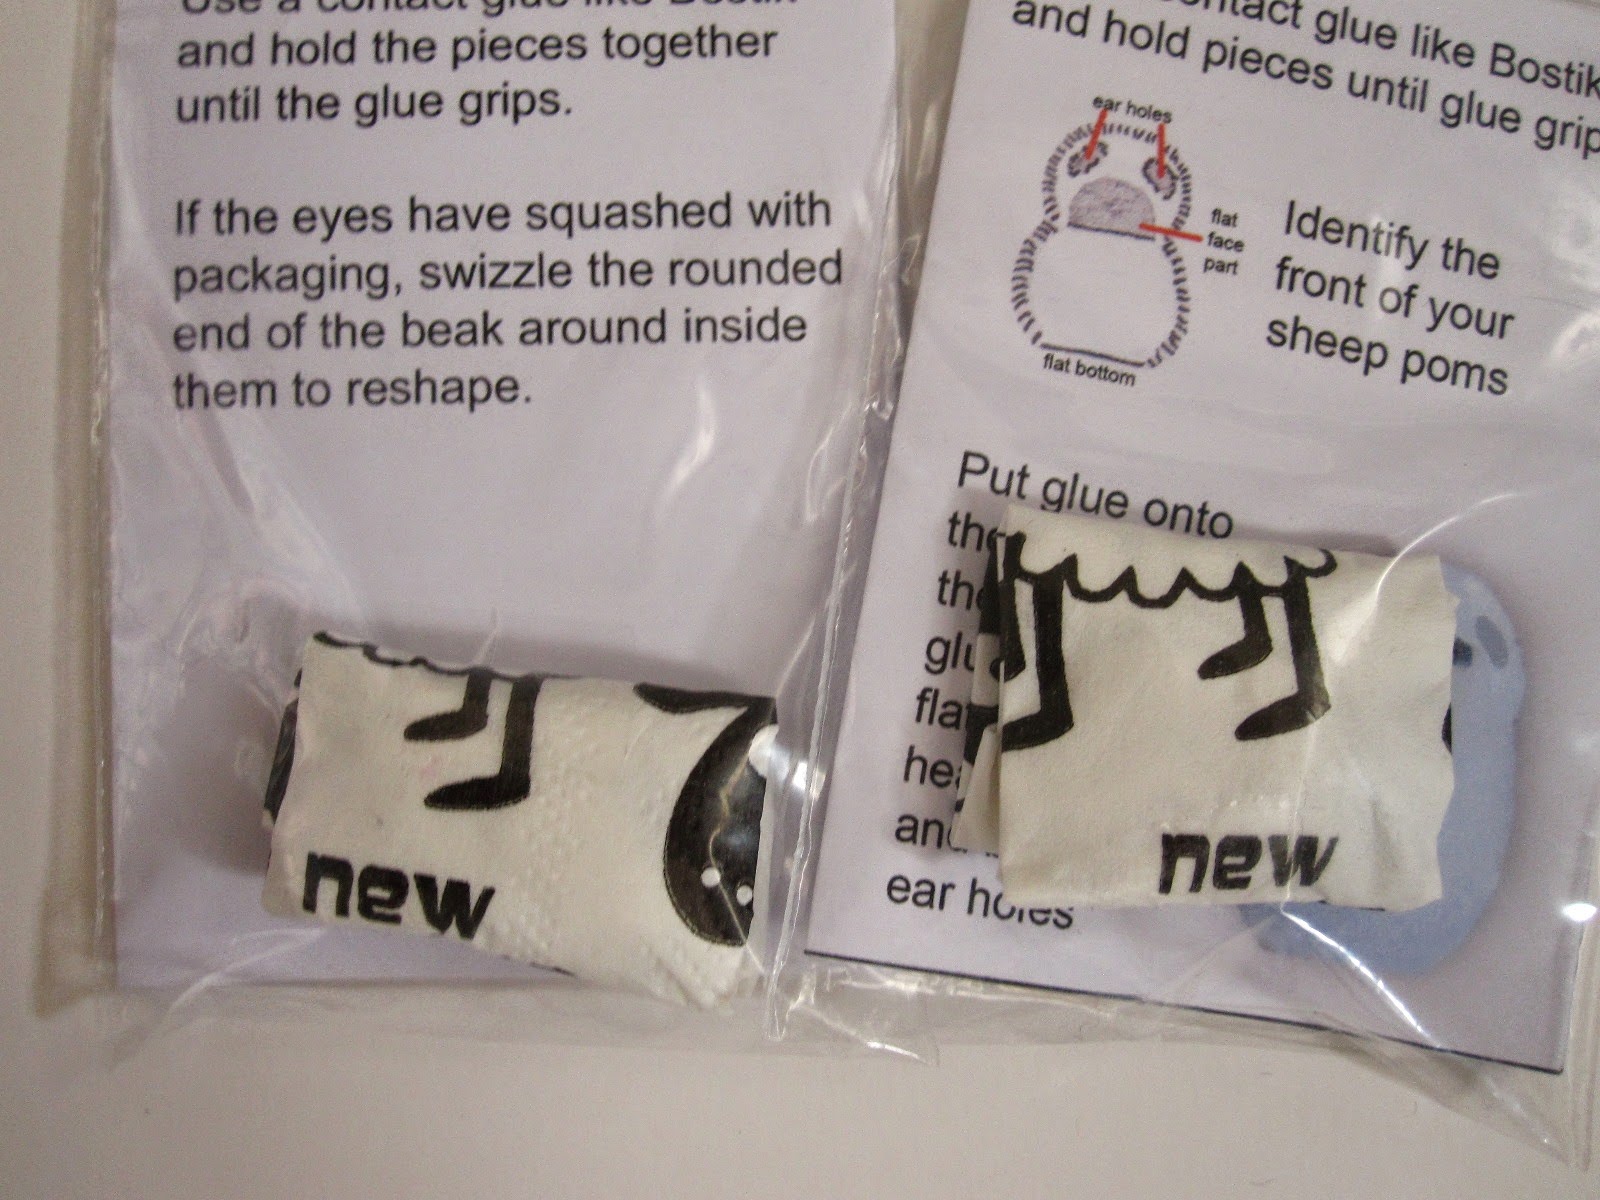 The back of two bagged miniature cuddly toy kits, showing the pieces wrapped in New Zealand themed tissues.